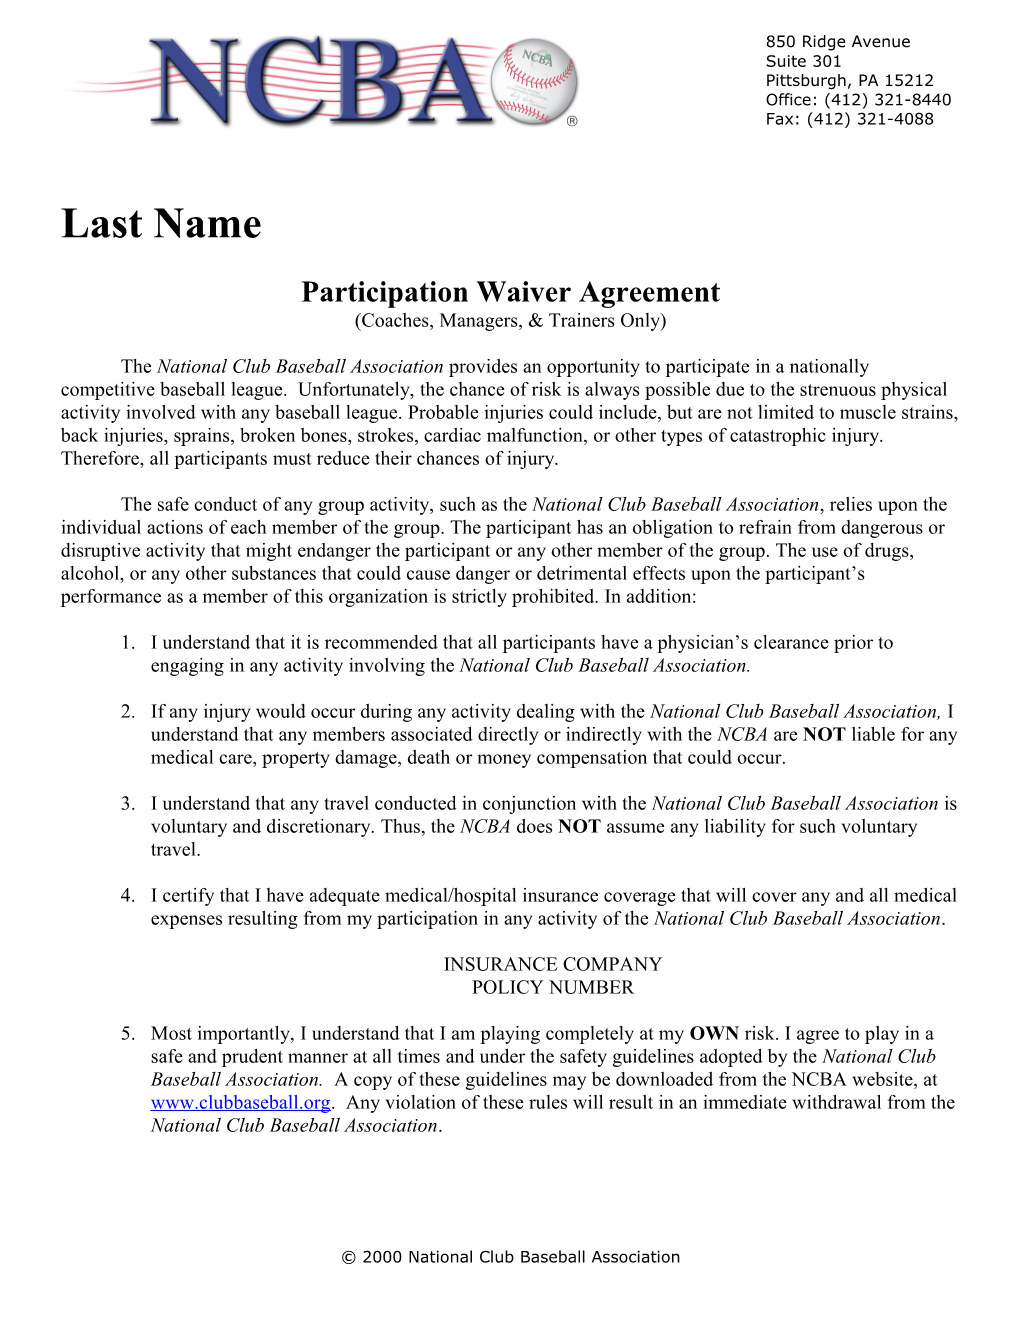 Participation Waiver Agreement